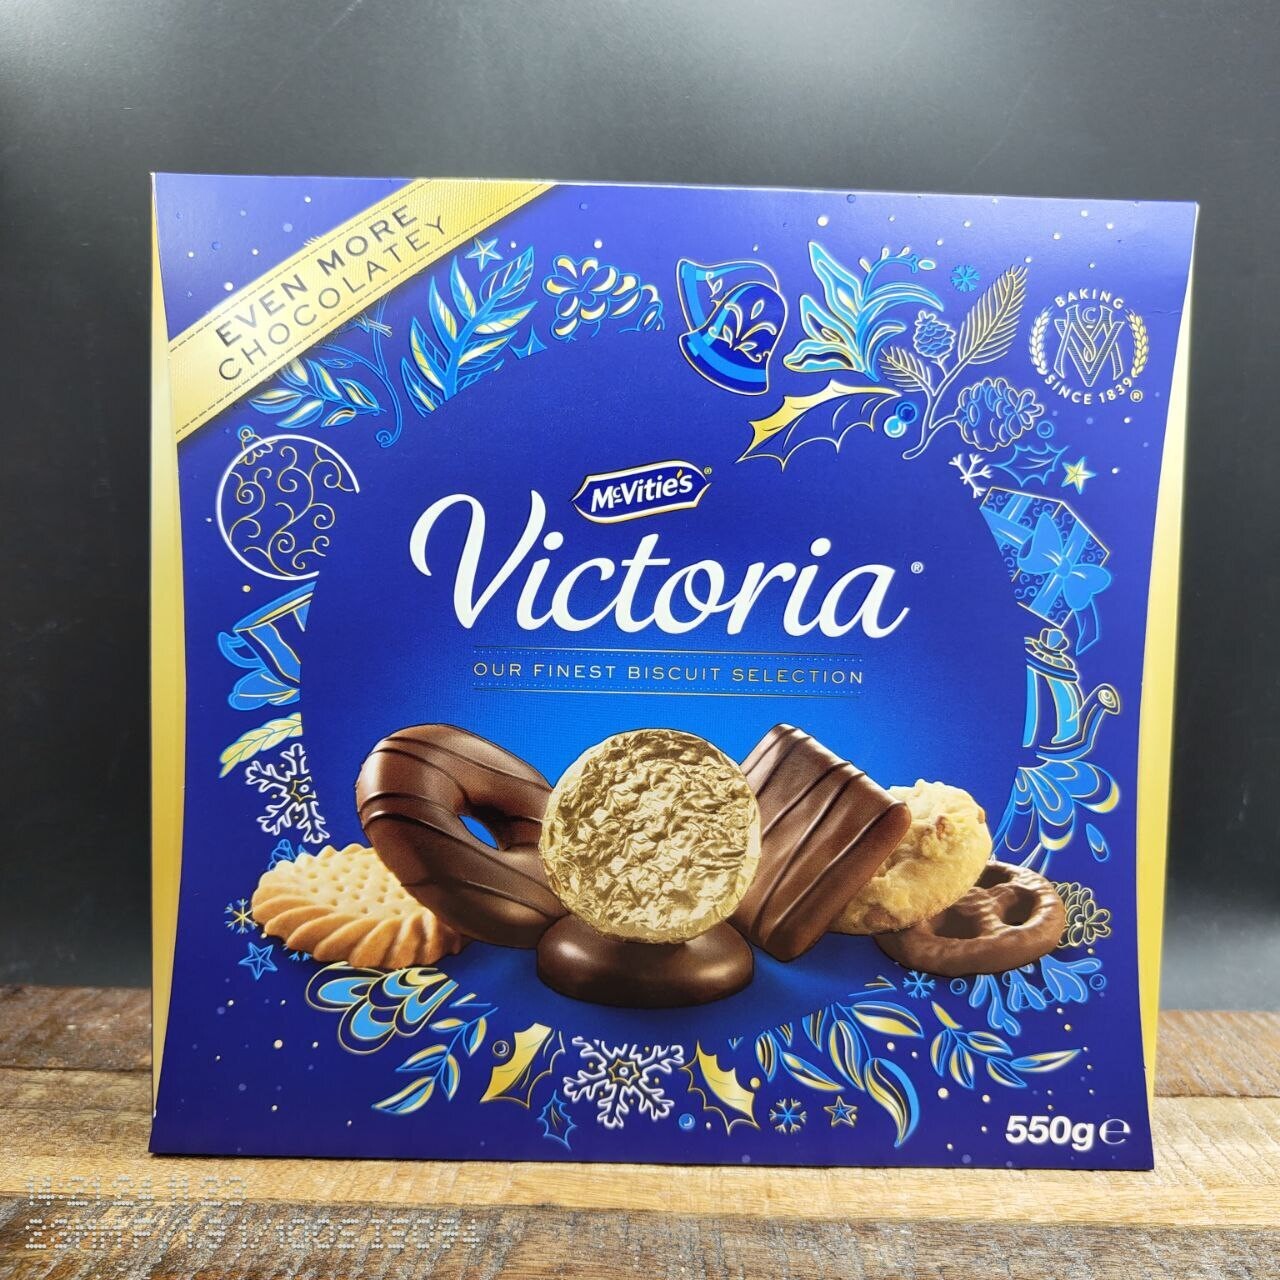 McVities Victoria Classic Biscuit Collection 550g